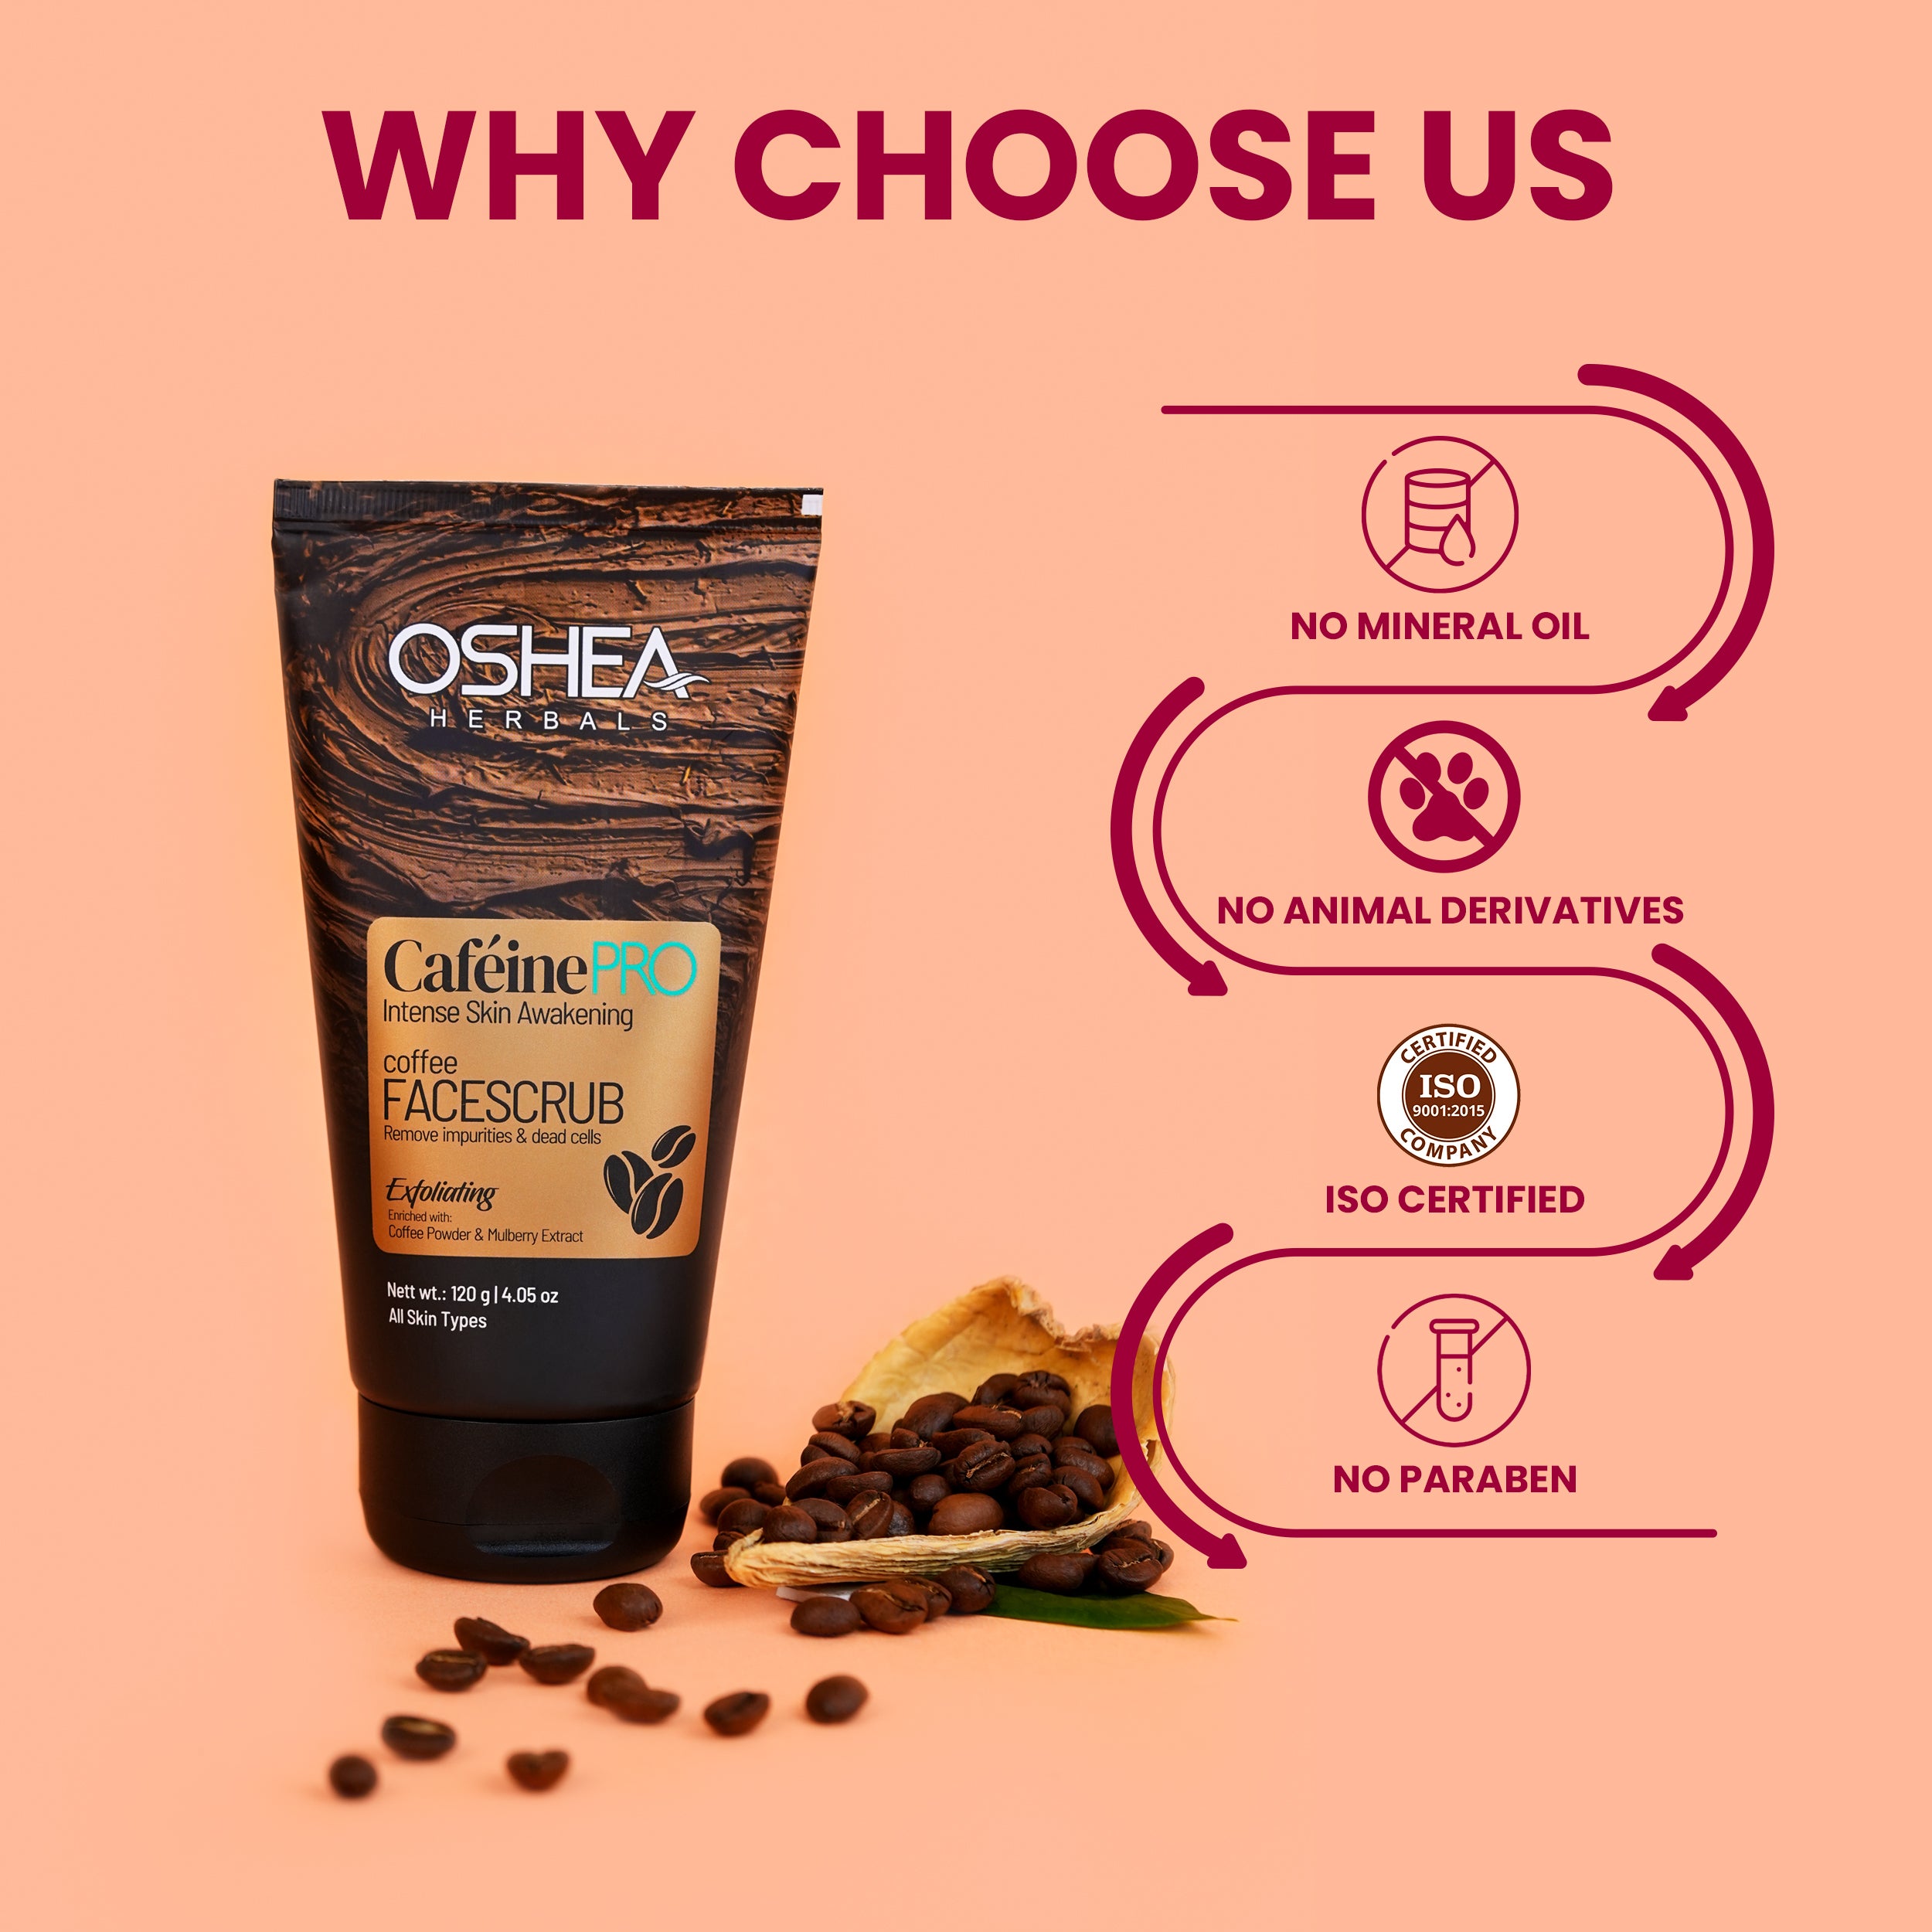 Why choose us Cafeine-Pro Face Scrub Oshea Herbals